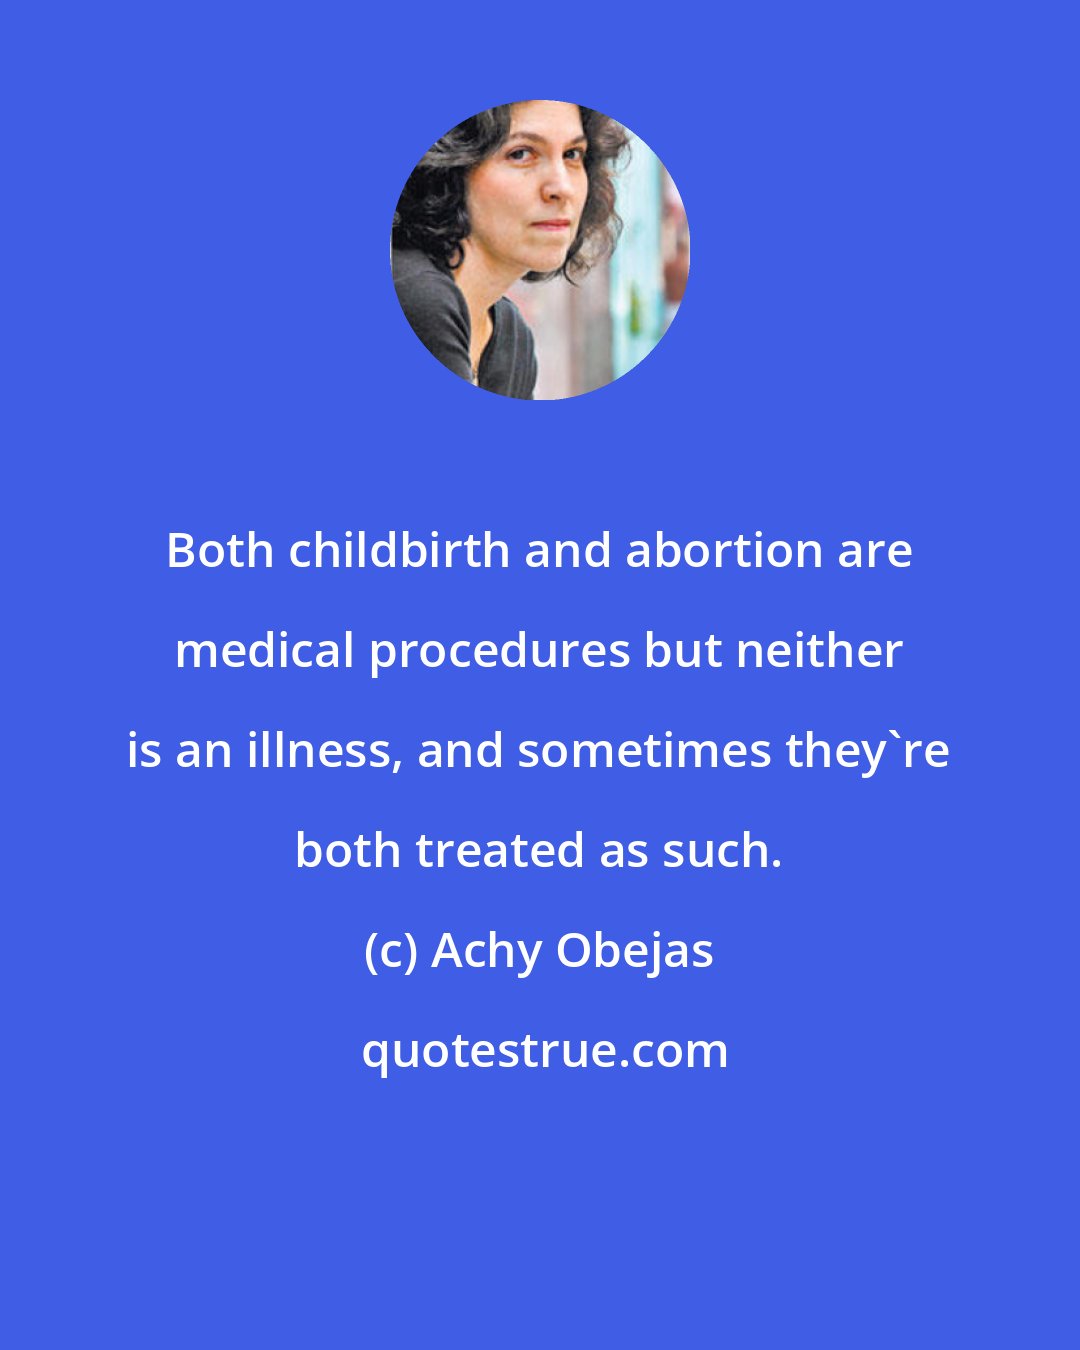 Achy Obejas: Both childbirth and abortion are medical procedures but neither is an illness, and sometimes they're both treated as such.